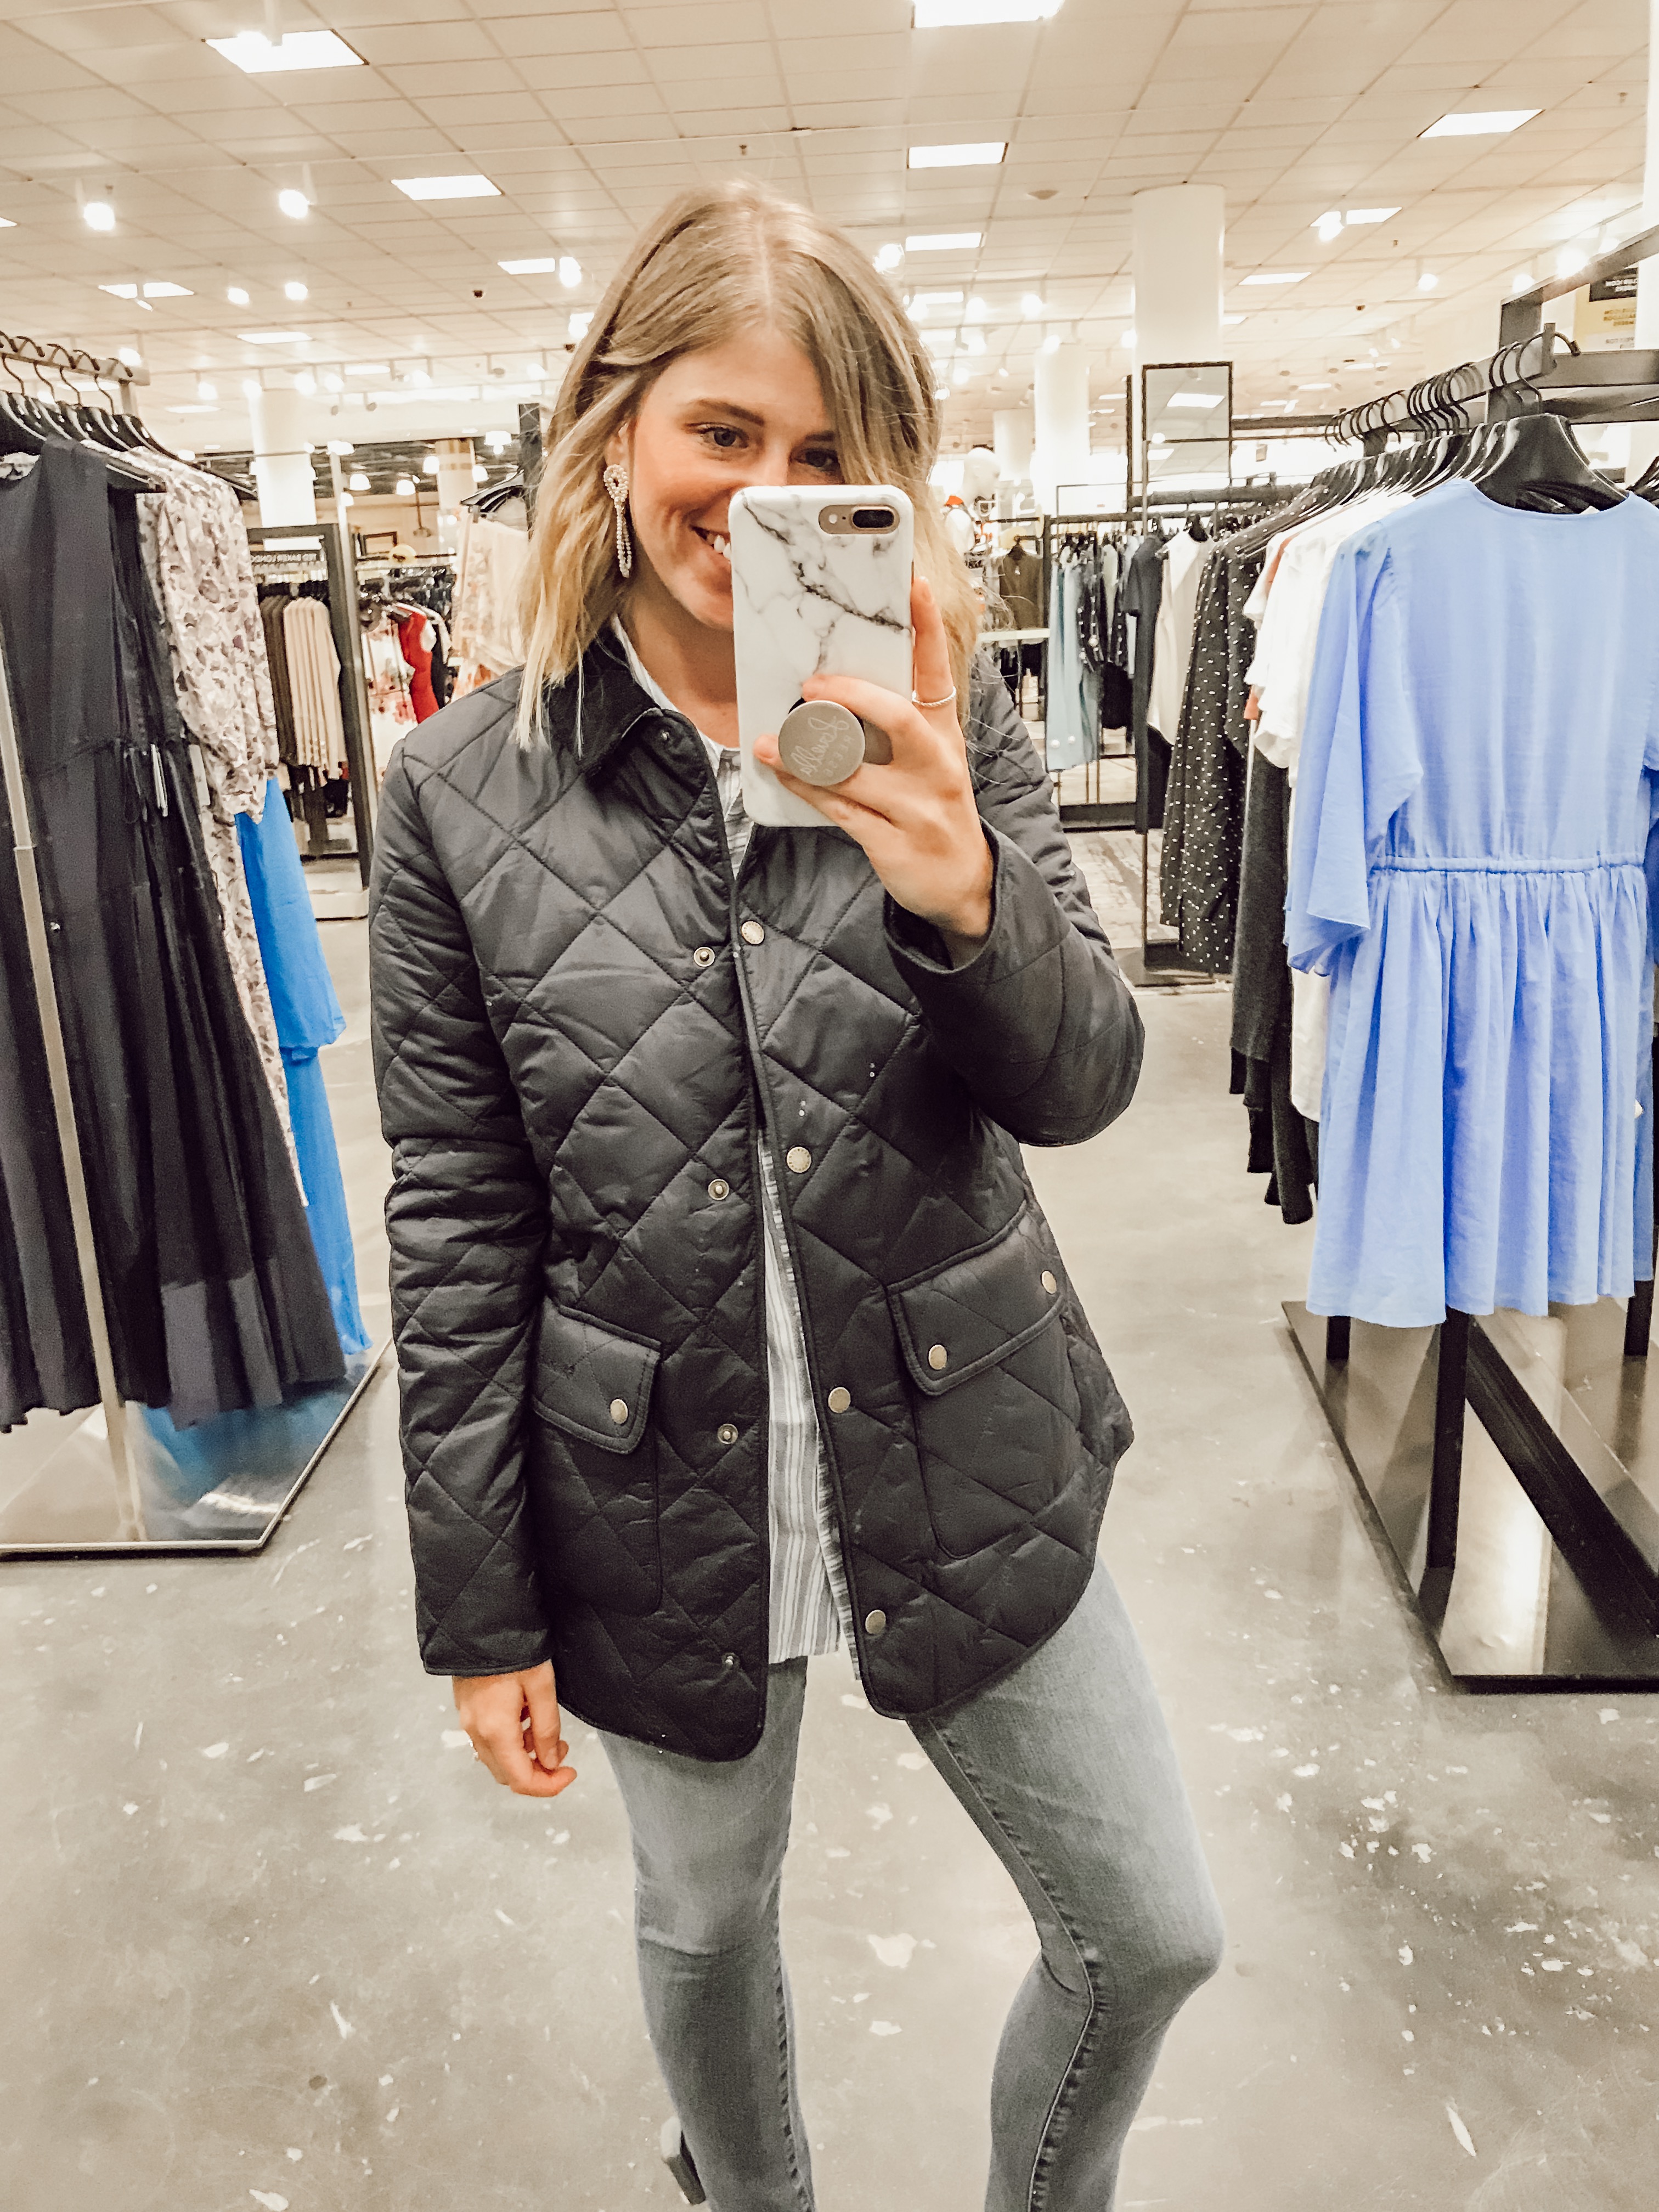 Barbour Oakland Quilted Jacket | 2019 Nordstrom Anniversary Fitting Room Session featured on Louella Reese Life & Style Blog